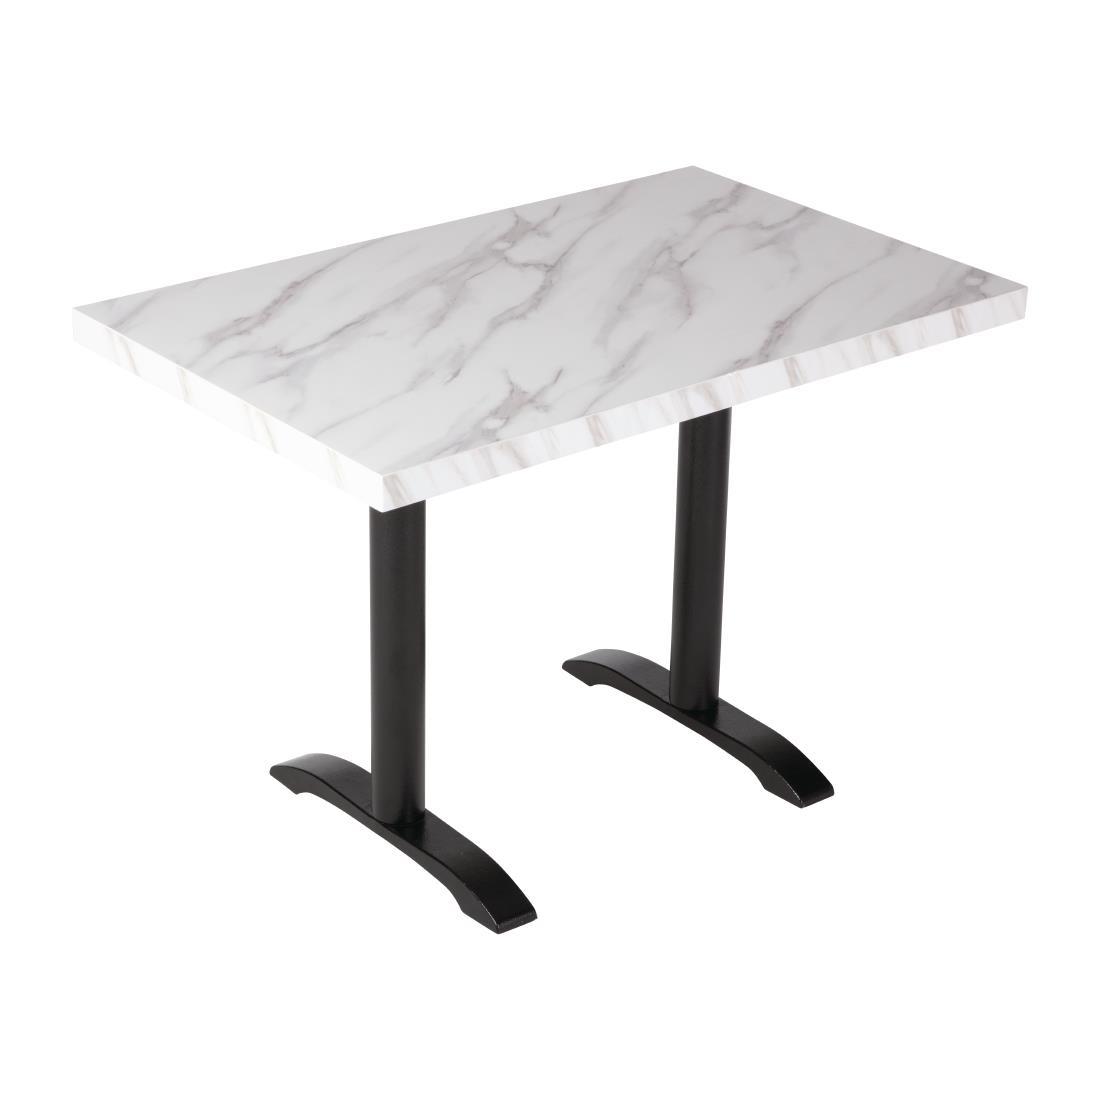 Bolero Pre-Drilled Rectangular Table Top Marble Effect 700mm - DT447  - 6